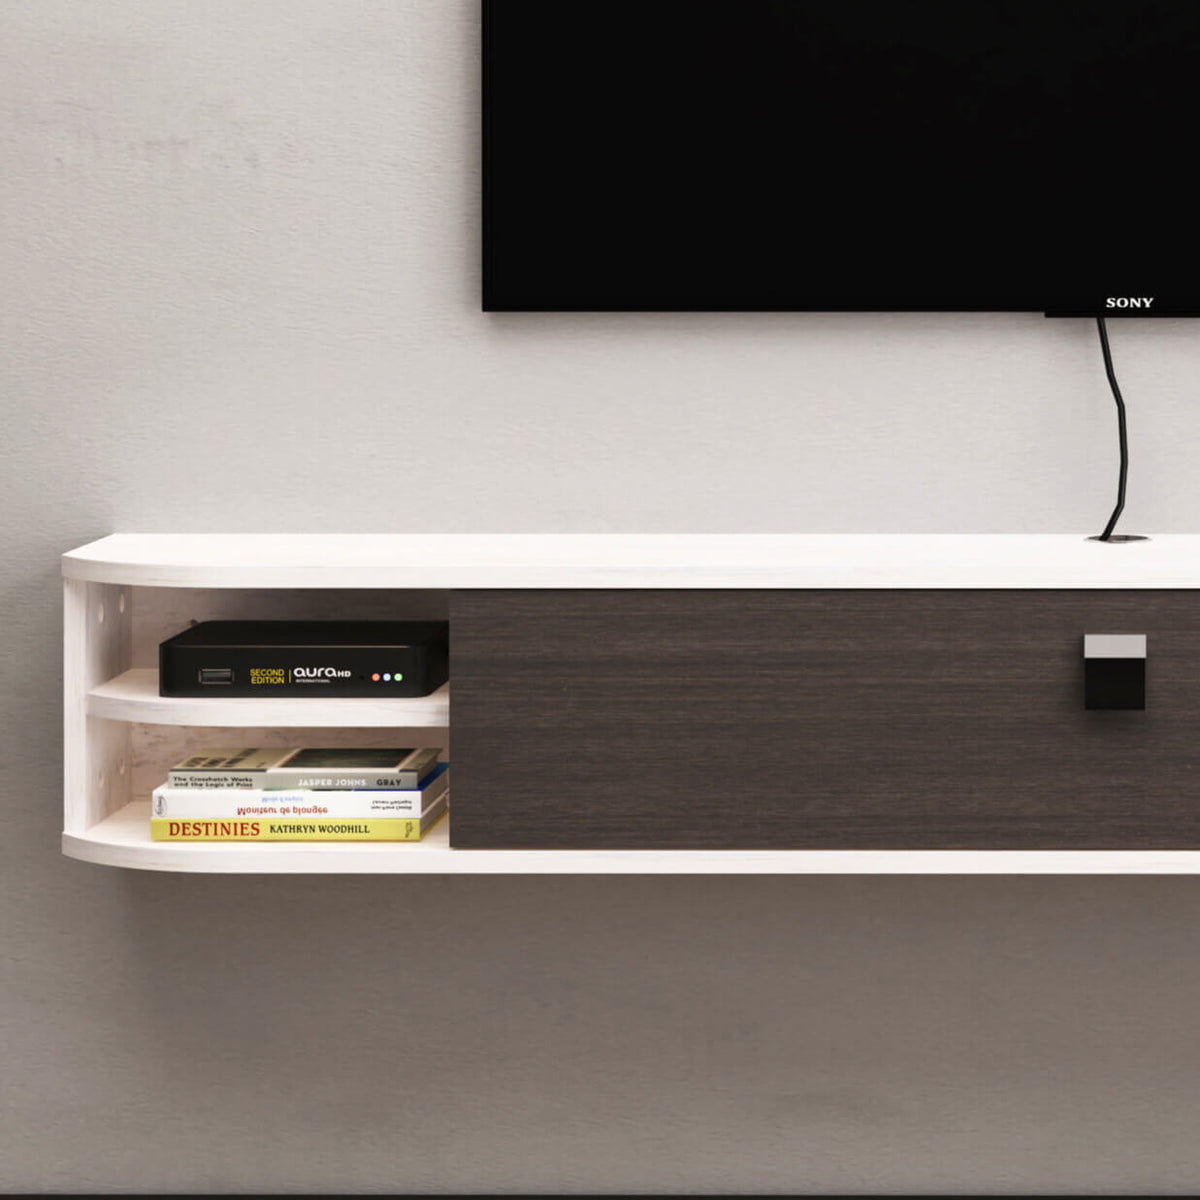 63.01" Off White Plywood Floating TV Stand Shelf with Storage Cubbies for 65" 70" Television